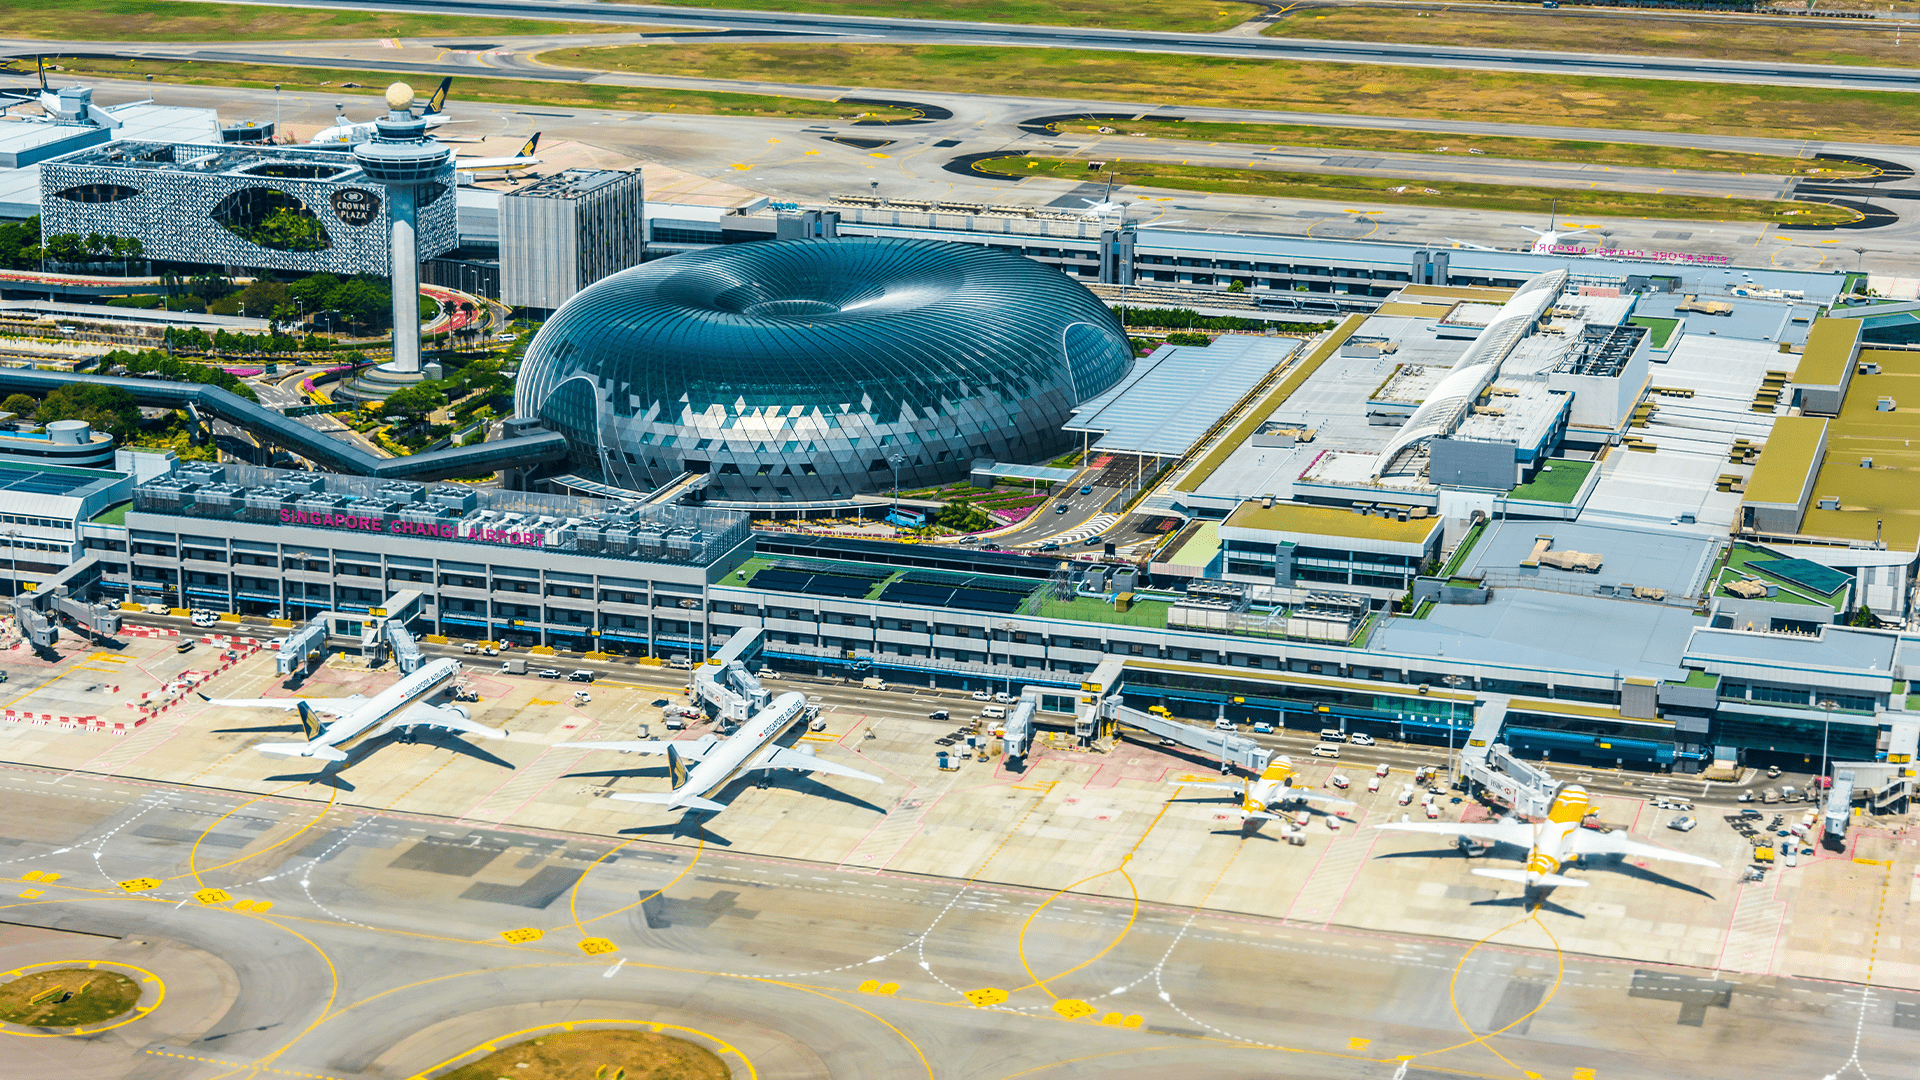 Aerial view Changi Airport Singapore with airplanes on apron 